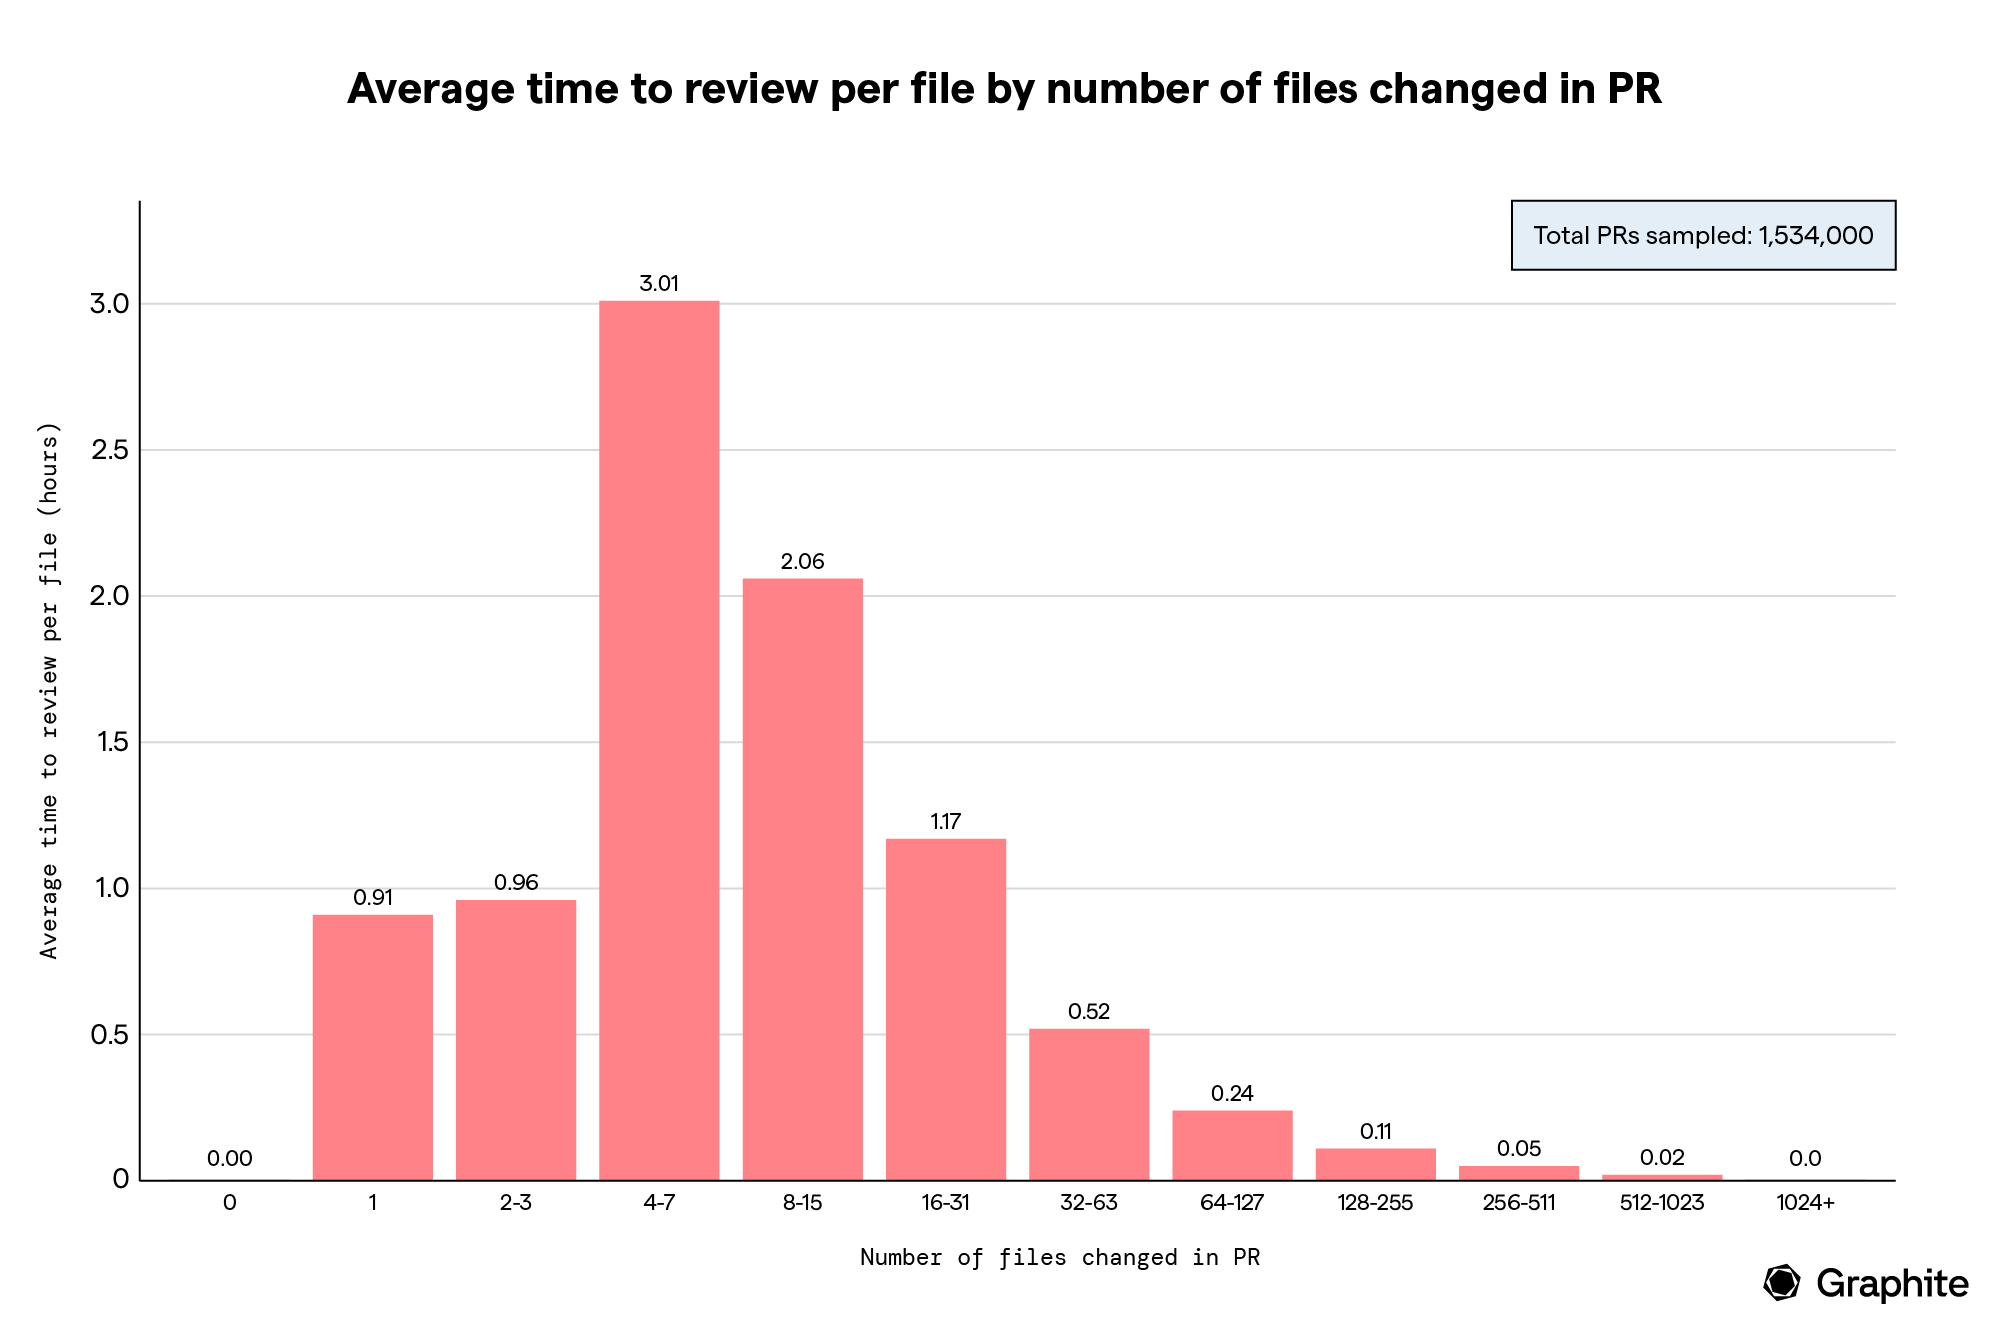 bar graph showing the average time to review per file by numbers of files. 4-7 files averages 3 hours, 512-1023 averages 0.02 hours